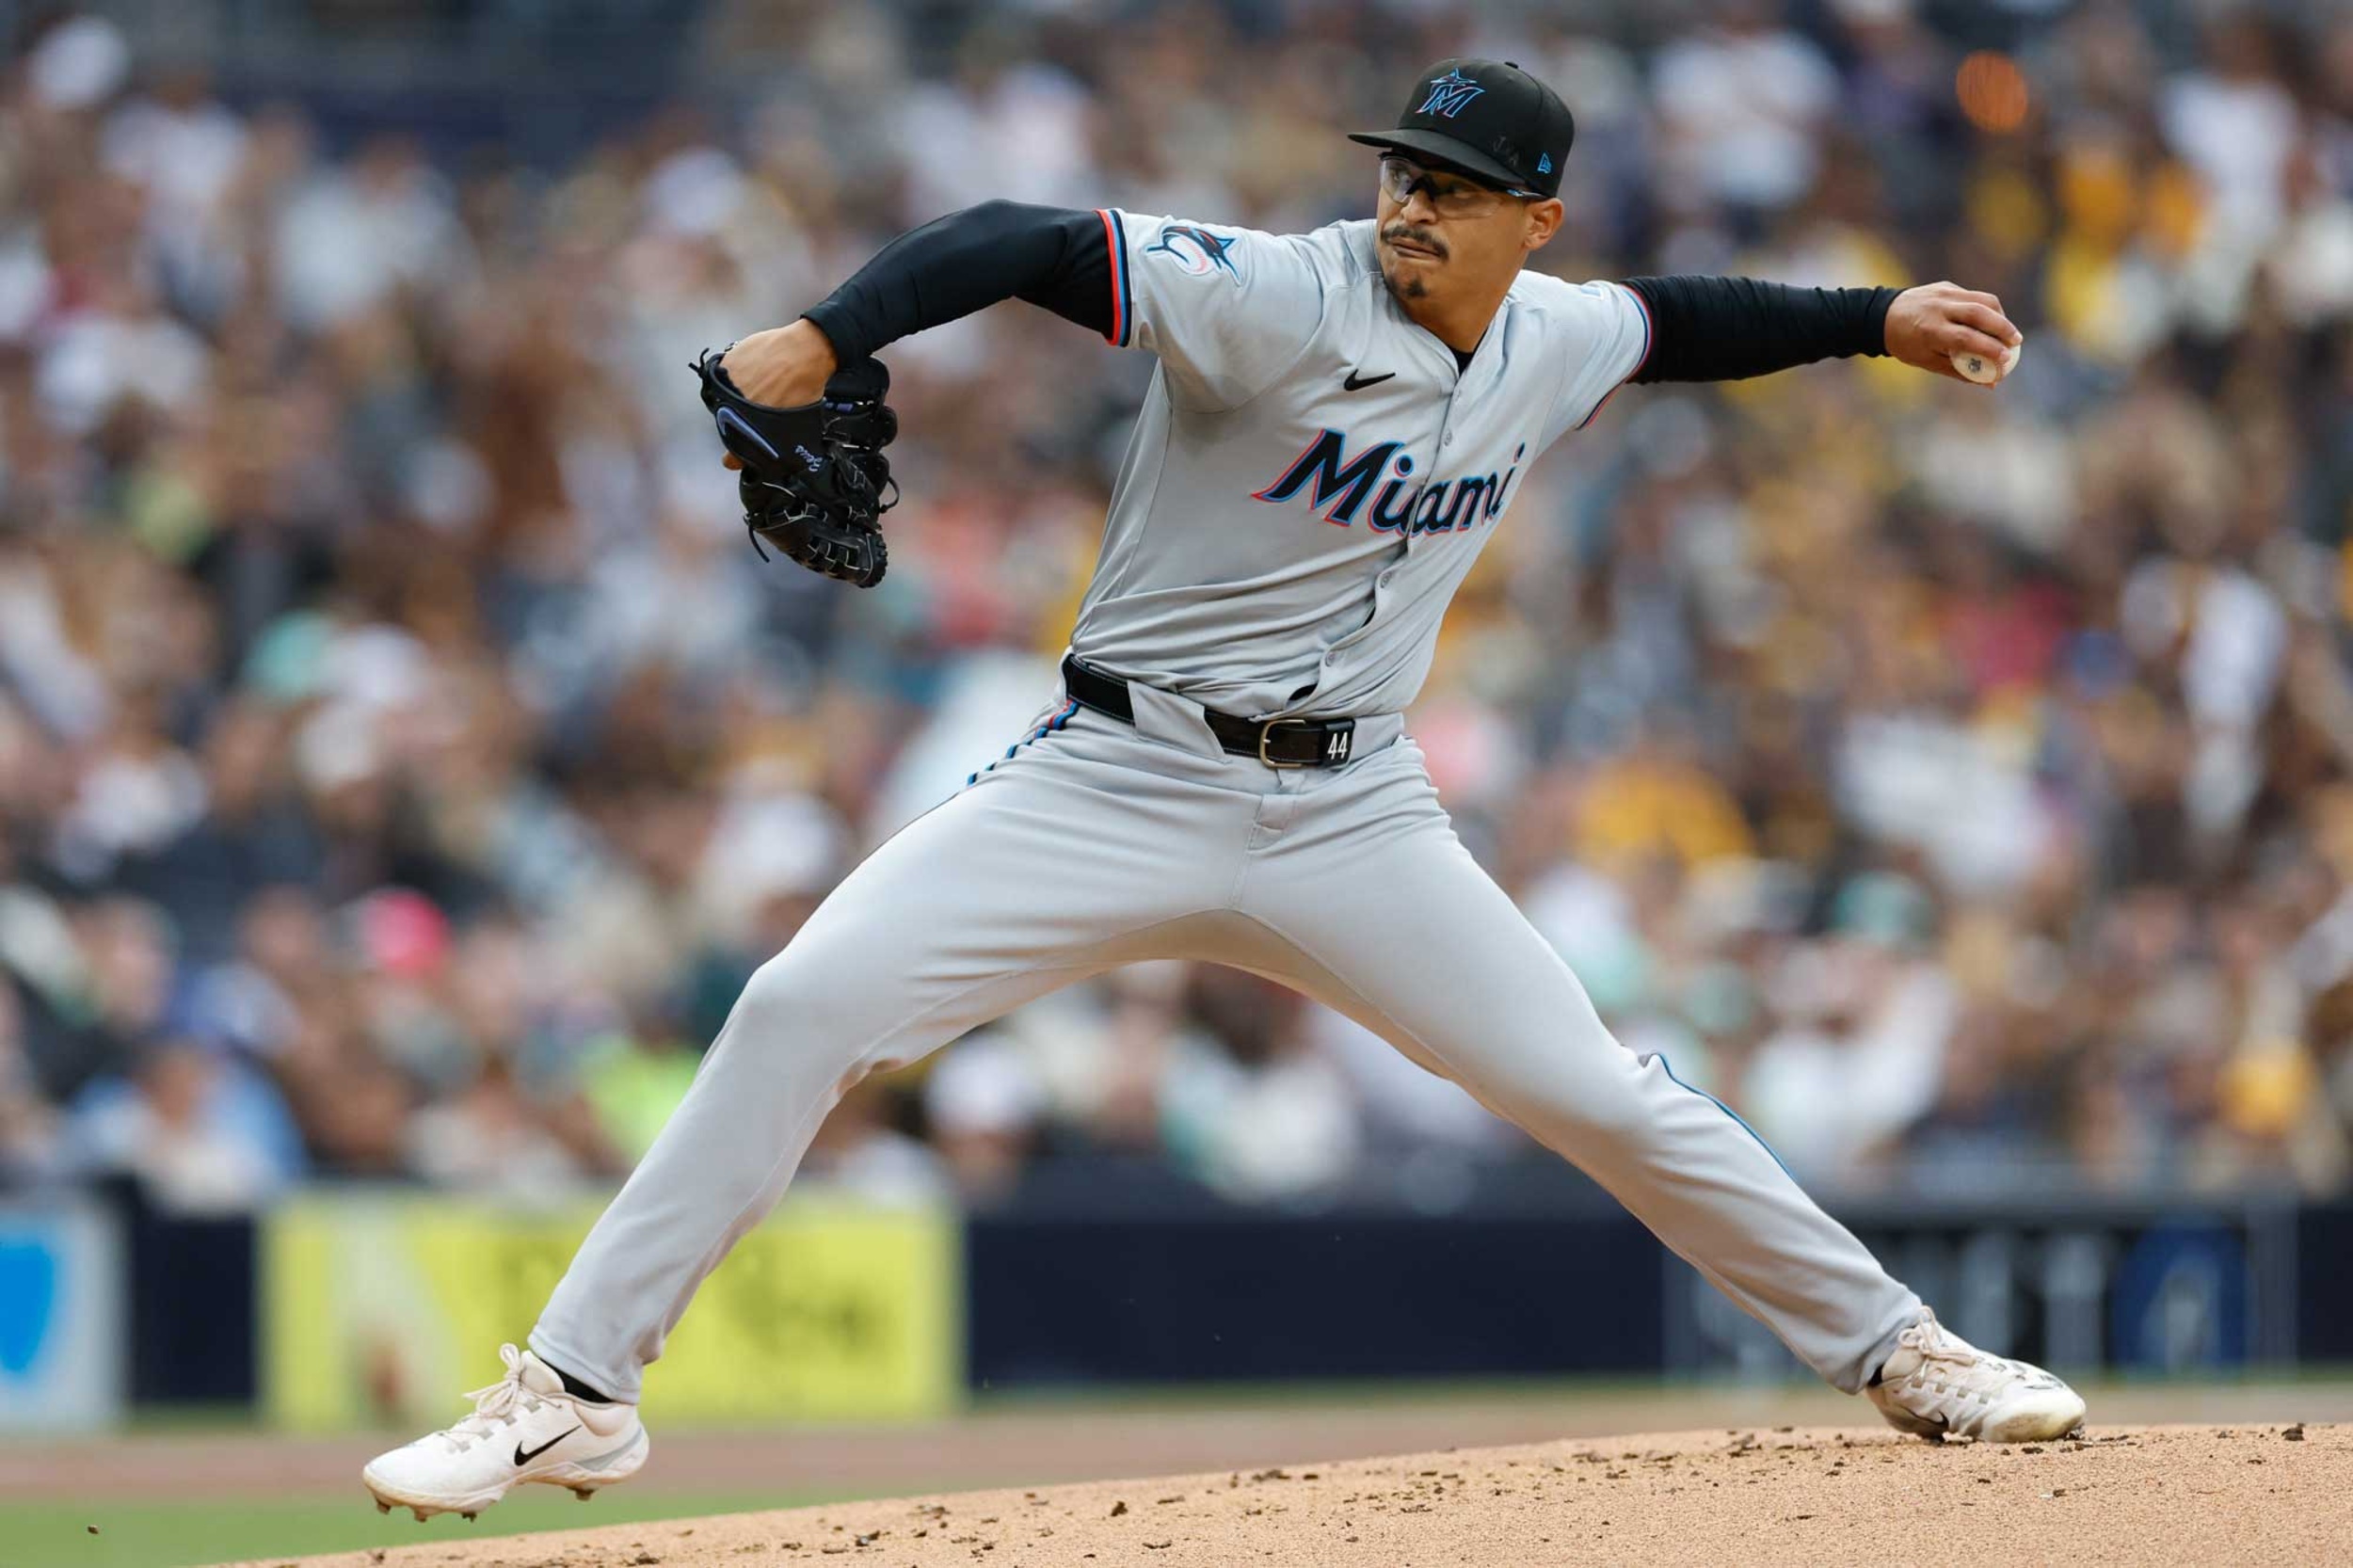 <p>Luzardo had his best season in 2023, posting a 3.58 ERA and making 32 starts for the Marlins. He's regressed early this season with a 5.30 ERA over his first 10 steals and also missing time with an elbow injury.</p><p><a href='https://www.msn.com/en-us/community/channel/vid-cj9pqbr0vn9in2b6ddcd8sfgpfq6x6utp44fssrv6mc2gtybw0us'>Follow us on MSN to see more of our exclusive MLB content.</a></p>